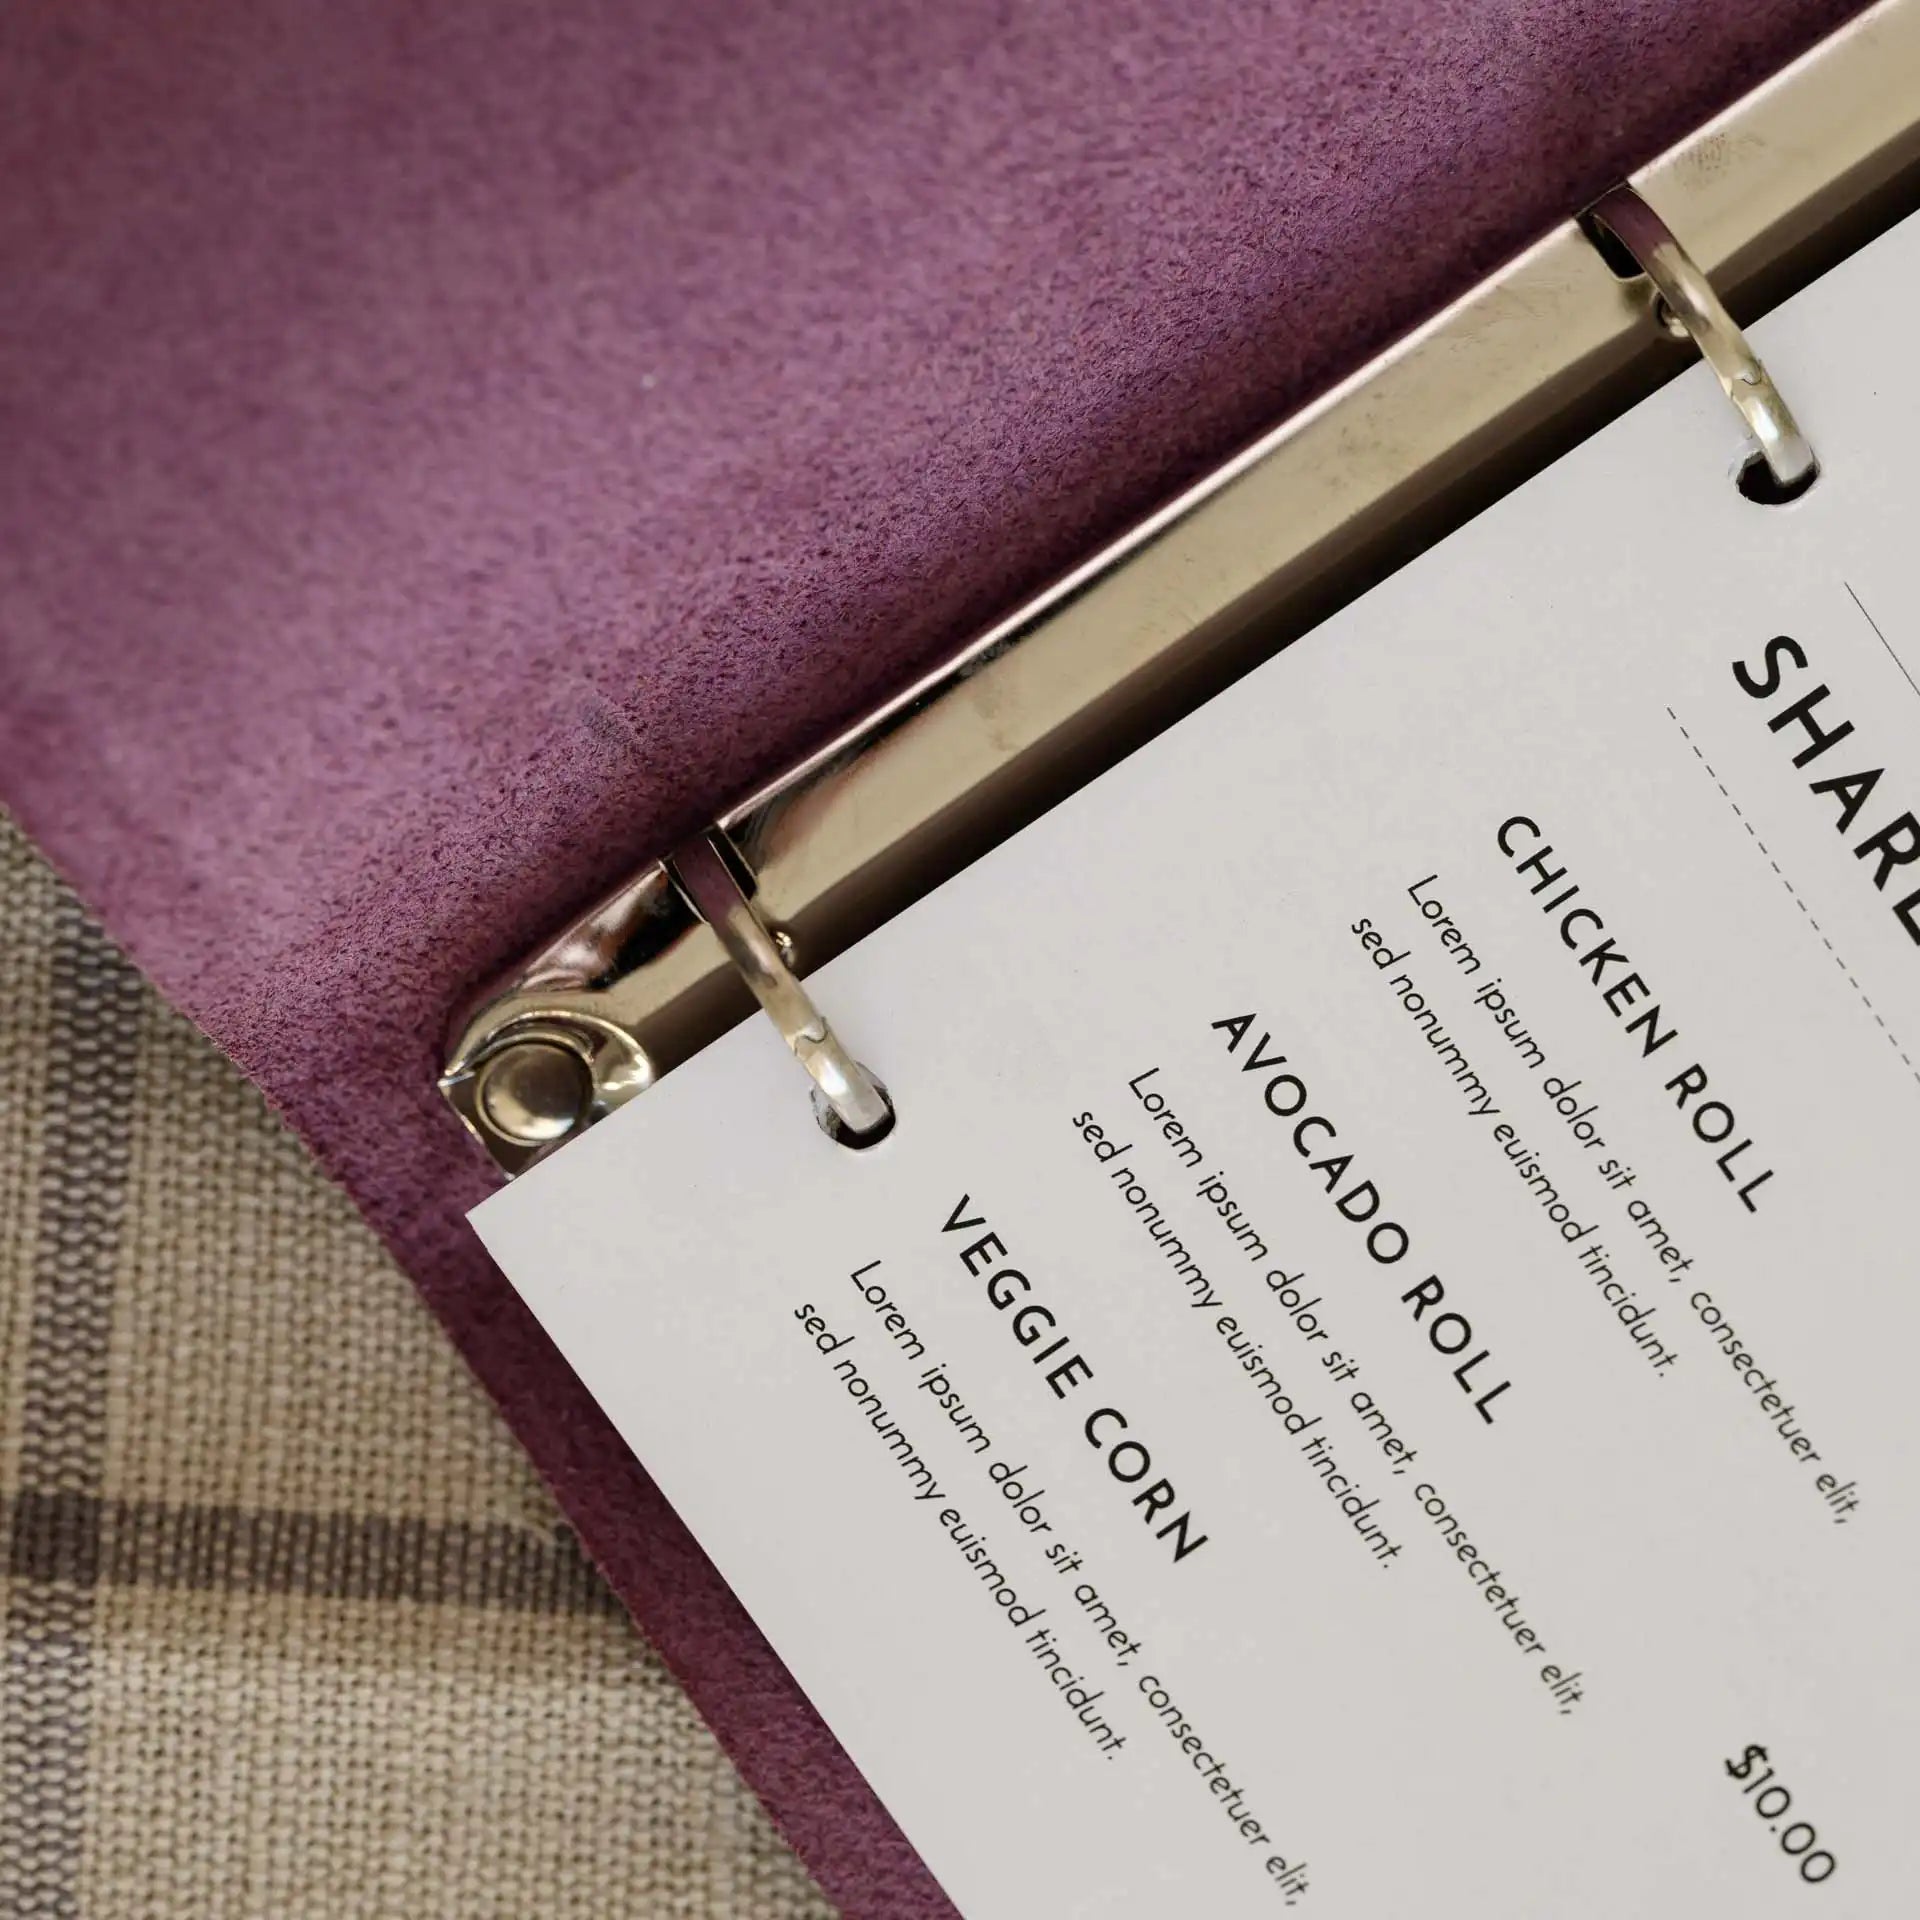 Exquisite Wine List Menu Folder, presenting your wine offerings with elegance, enhances the overall dining experience for your discerning guests.